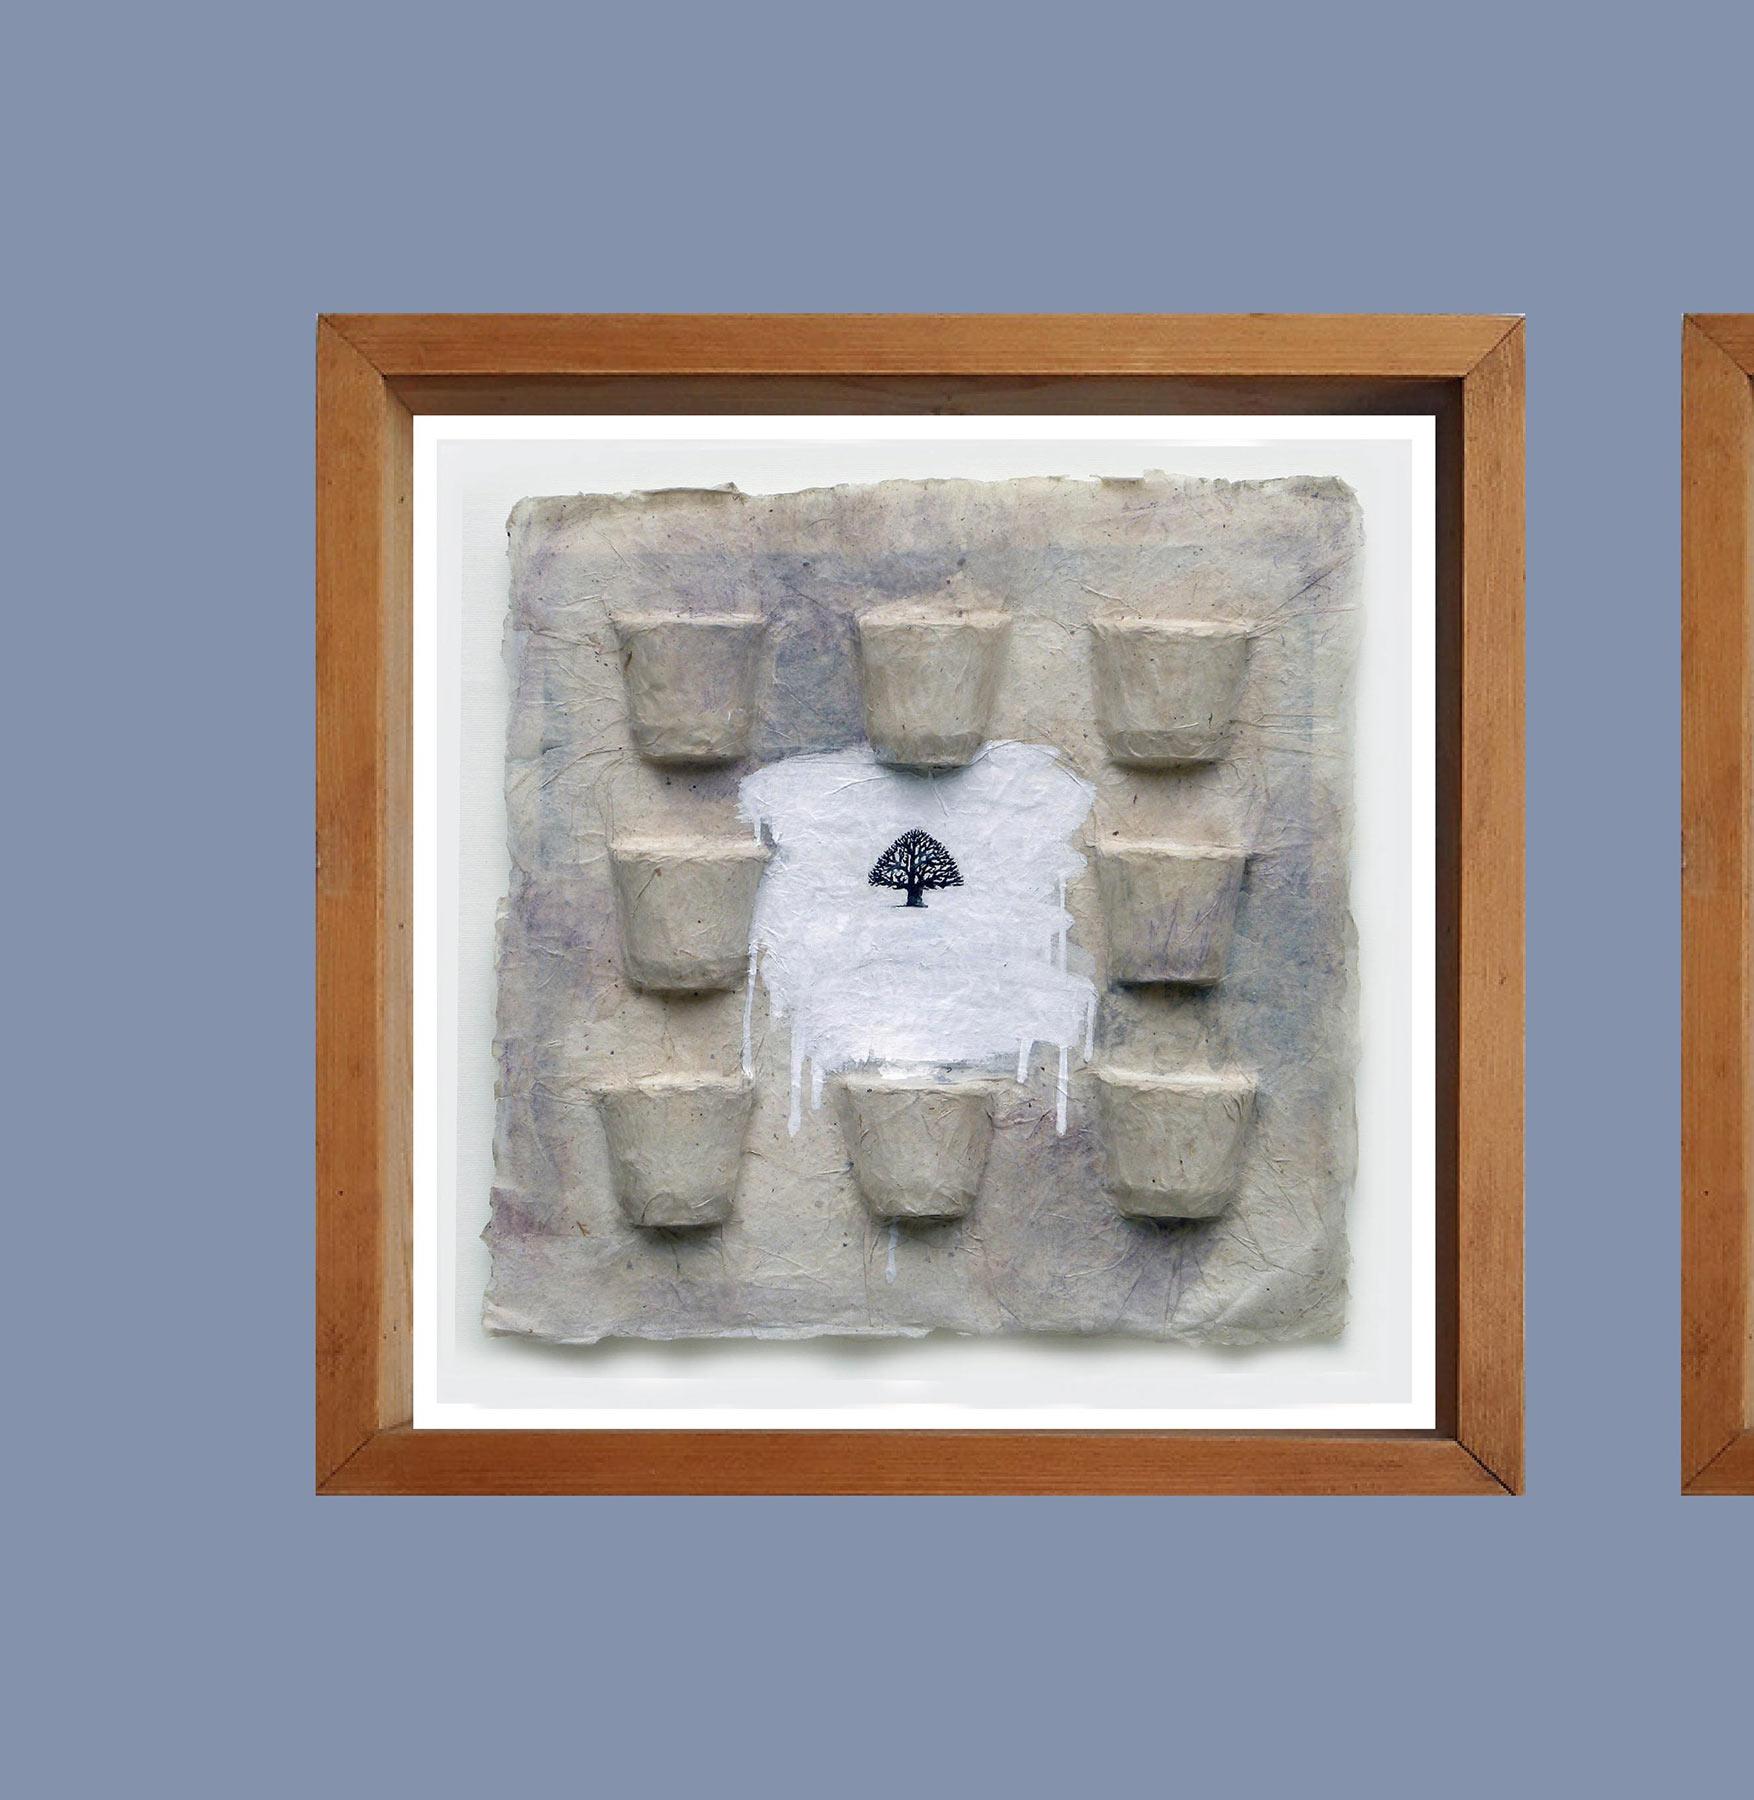 Arun Bain - Untitled 1 - 12 x 12 x 1 inches (each)
Two panels. Ink, Earth & Water color in casted Rice paper.
Inclusive of shipment in roll form.

Style : Arun  Bain feels that paintings allow him the freedom to explore a range of possibilities